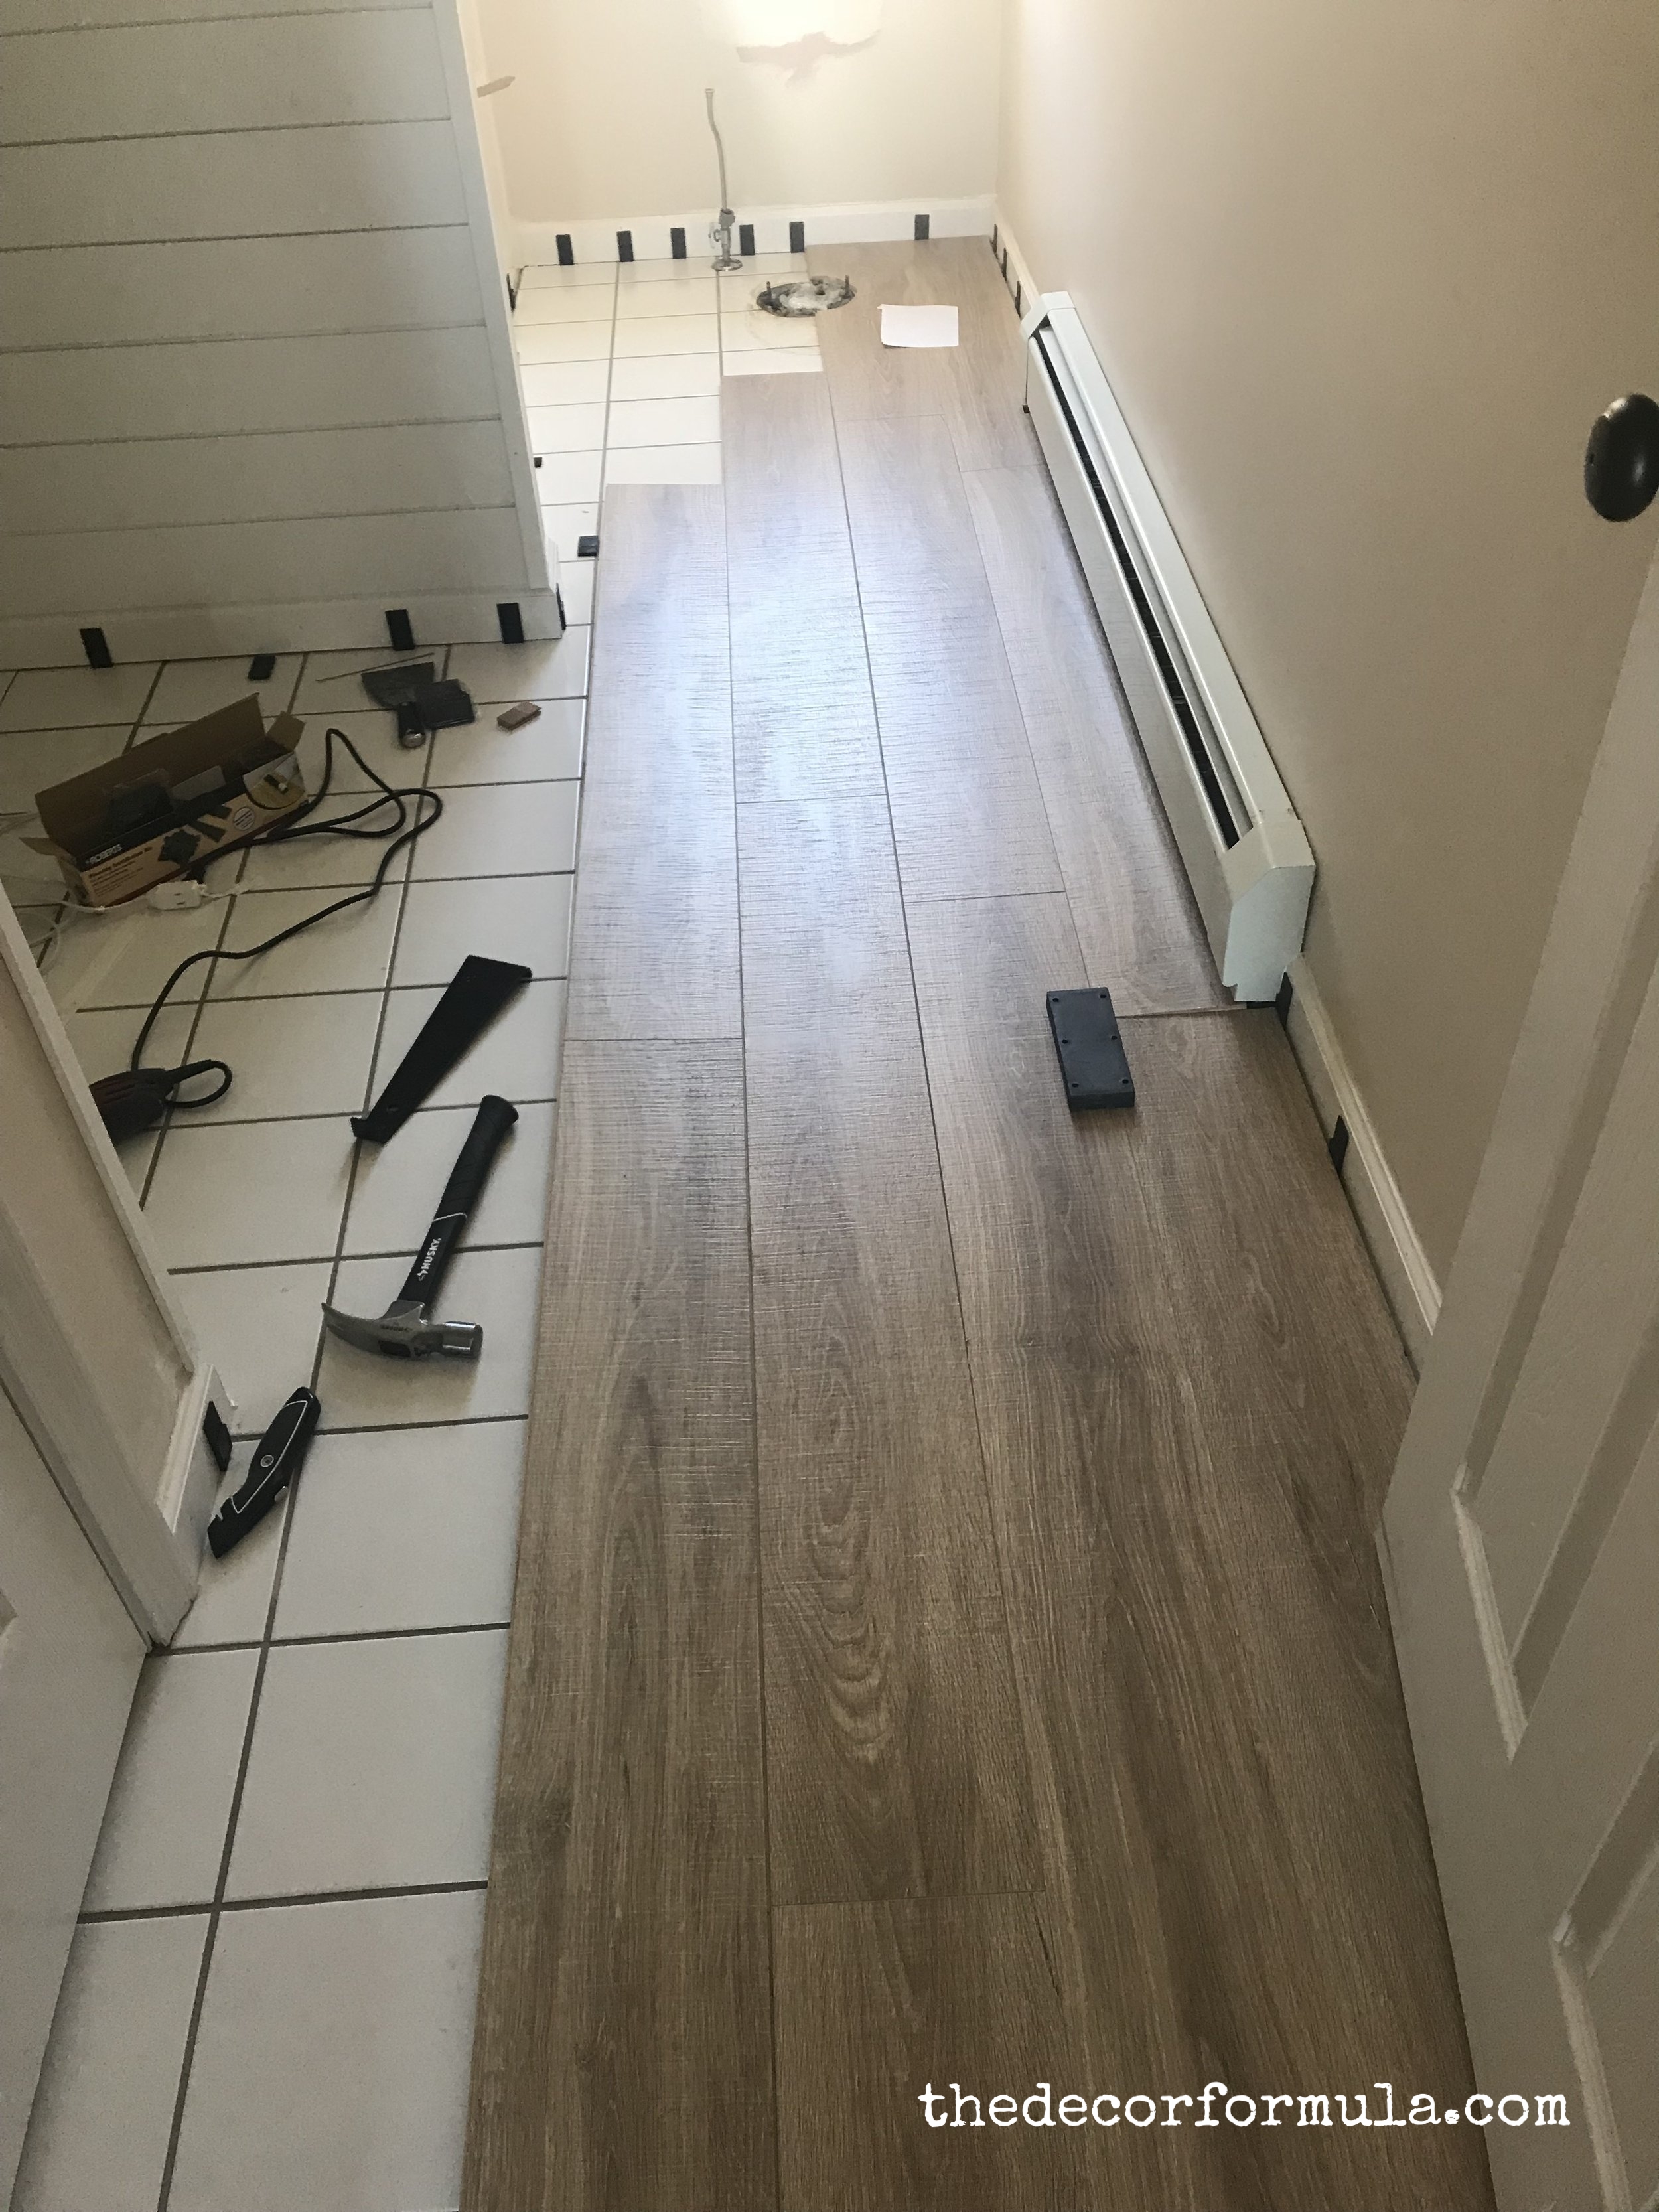 Ideas For Covering Up Tile Floors, Can You Lay Wood Floor Over Tile